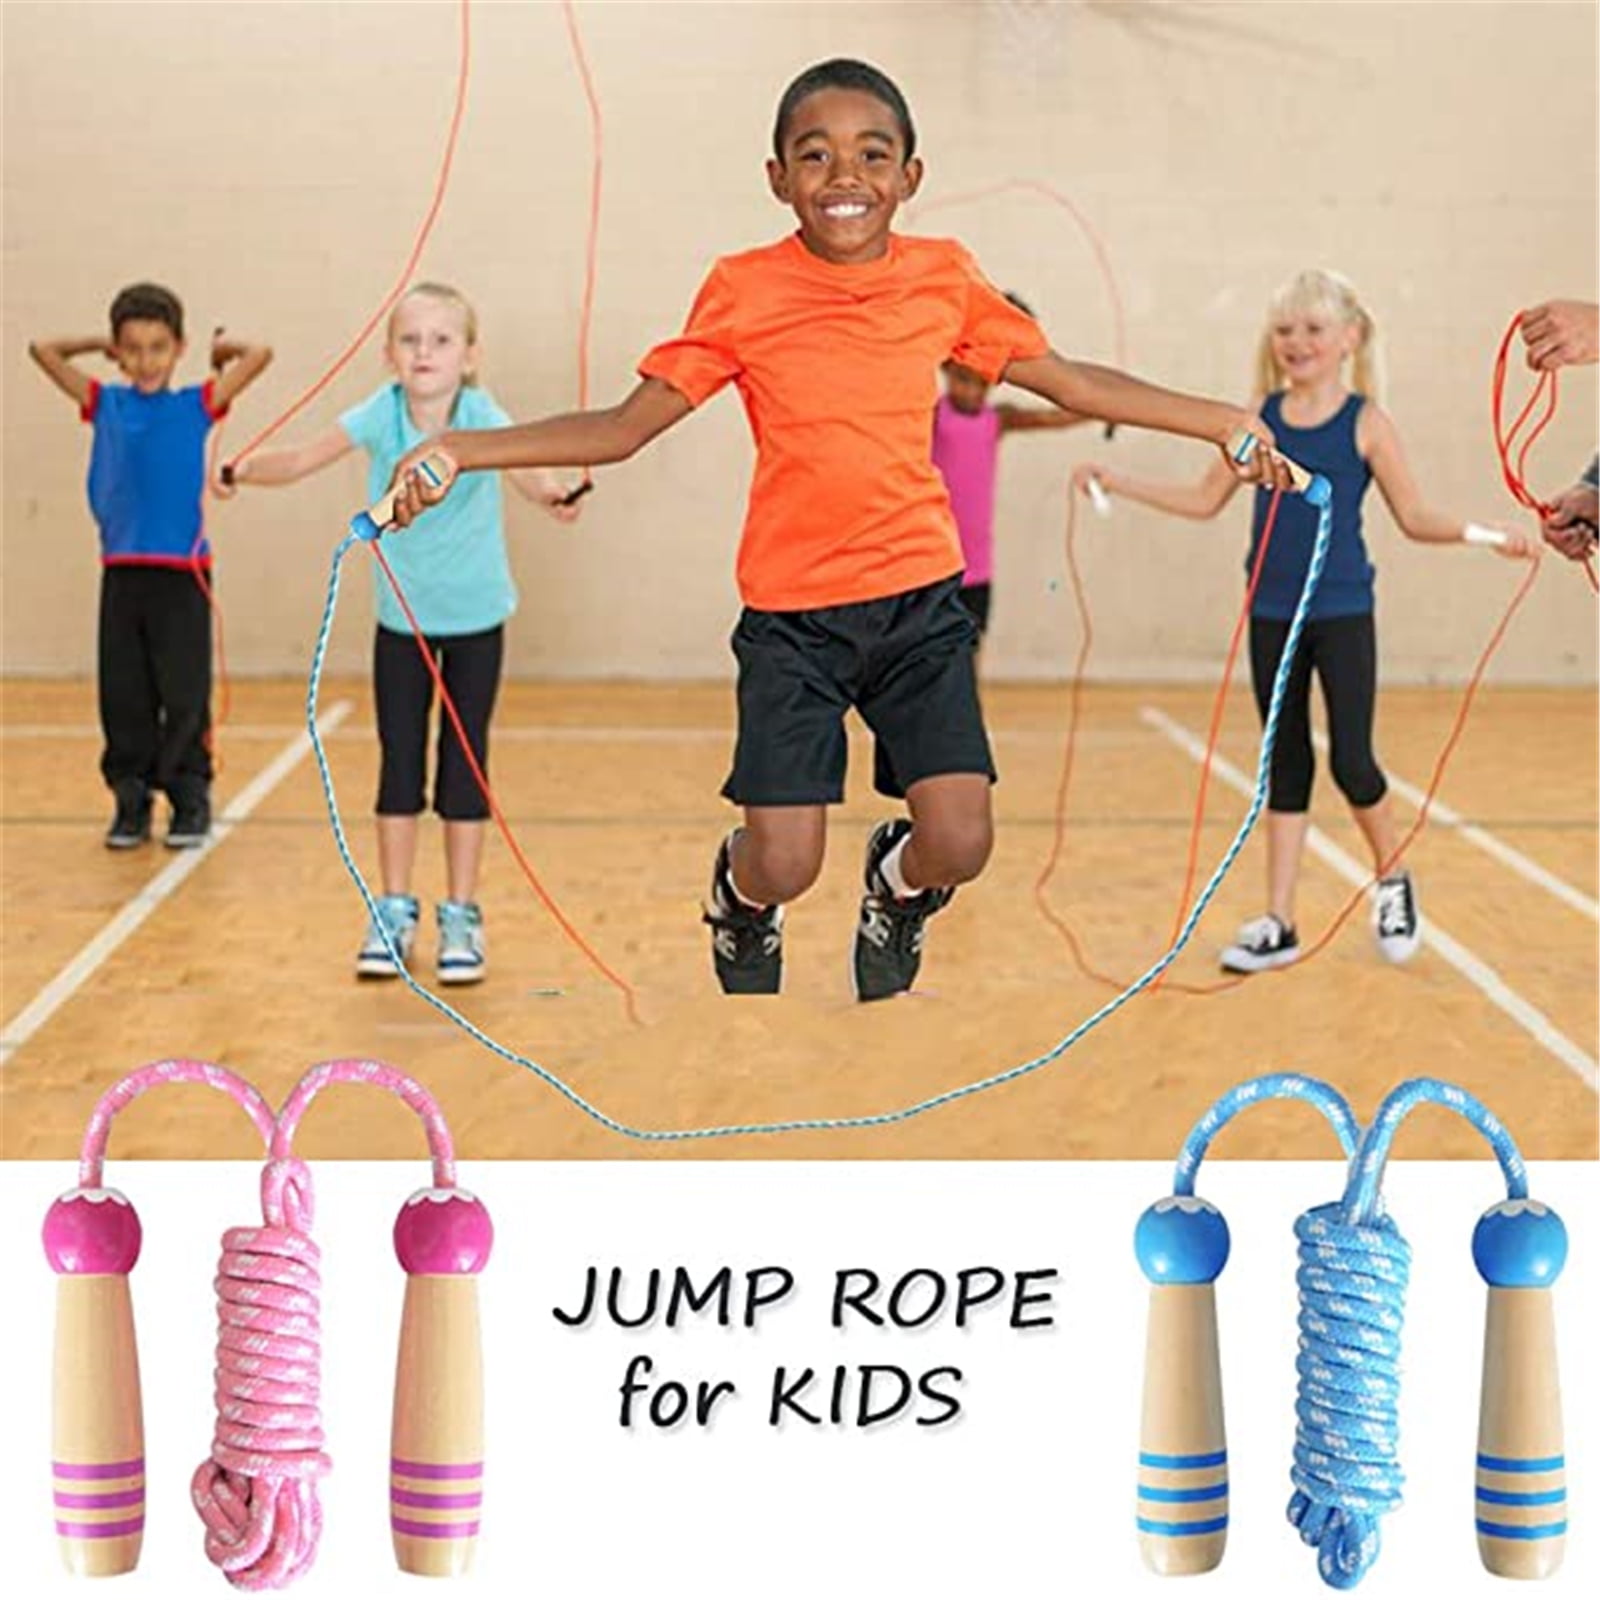 New Children Kids Skipping Soft Handle Rope With Counter Jump Fitness Exercise 